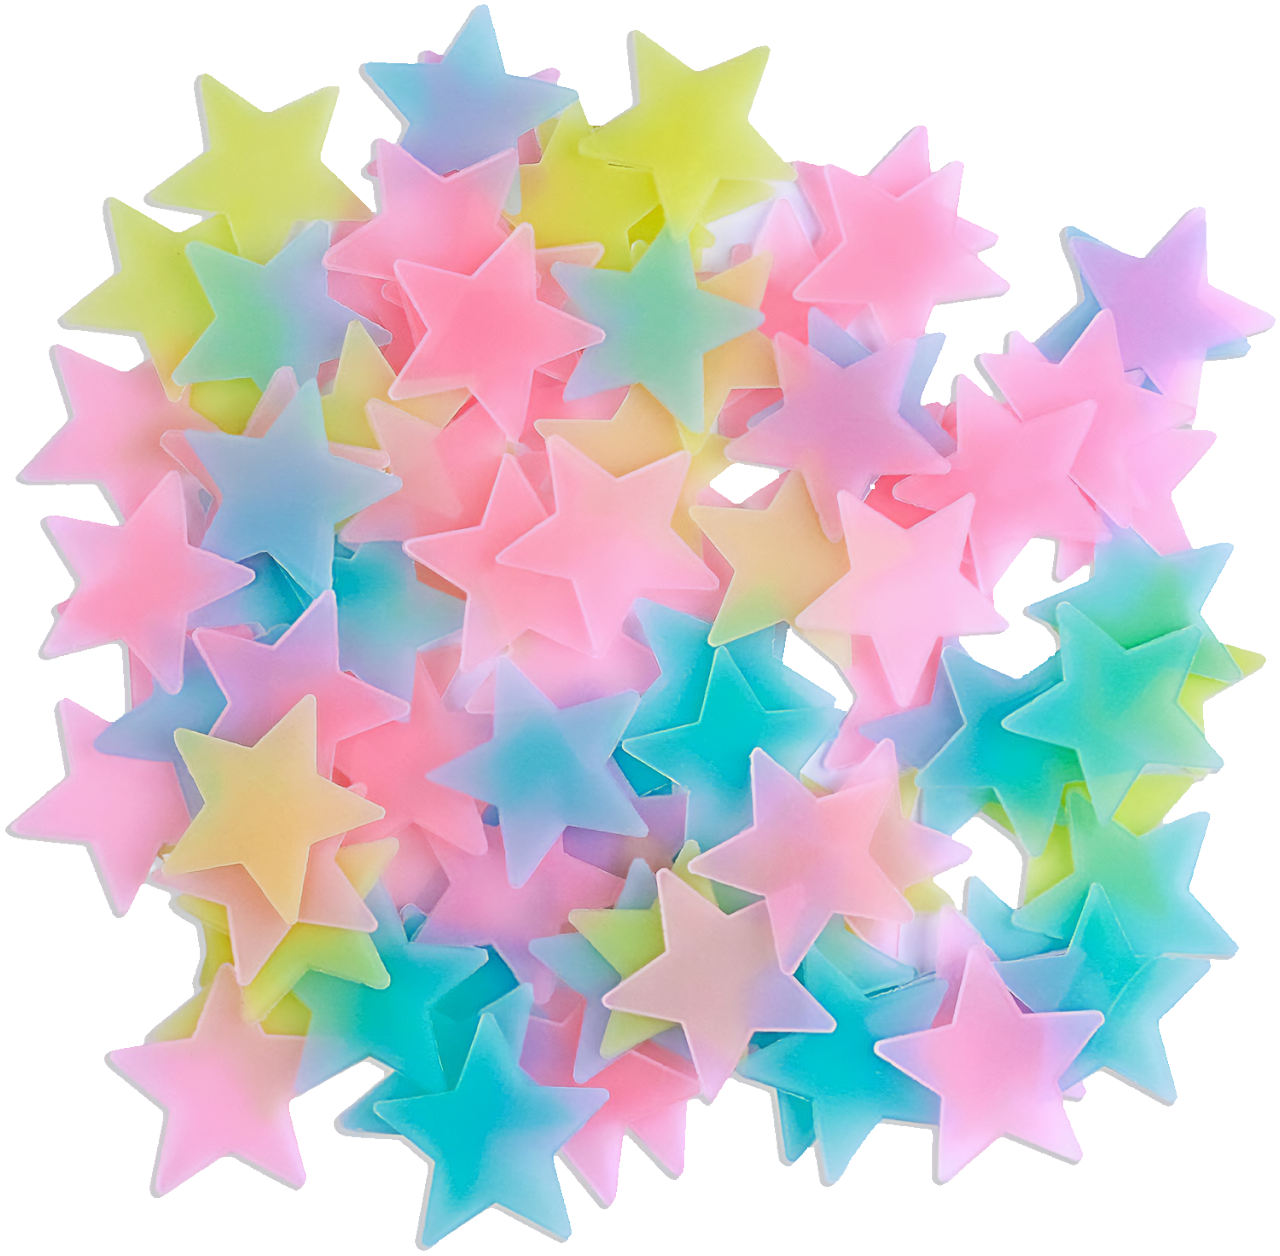 transparent image of a pile of pastel stars